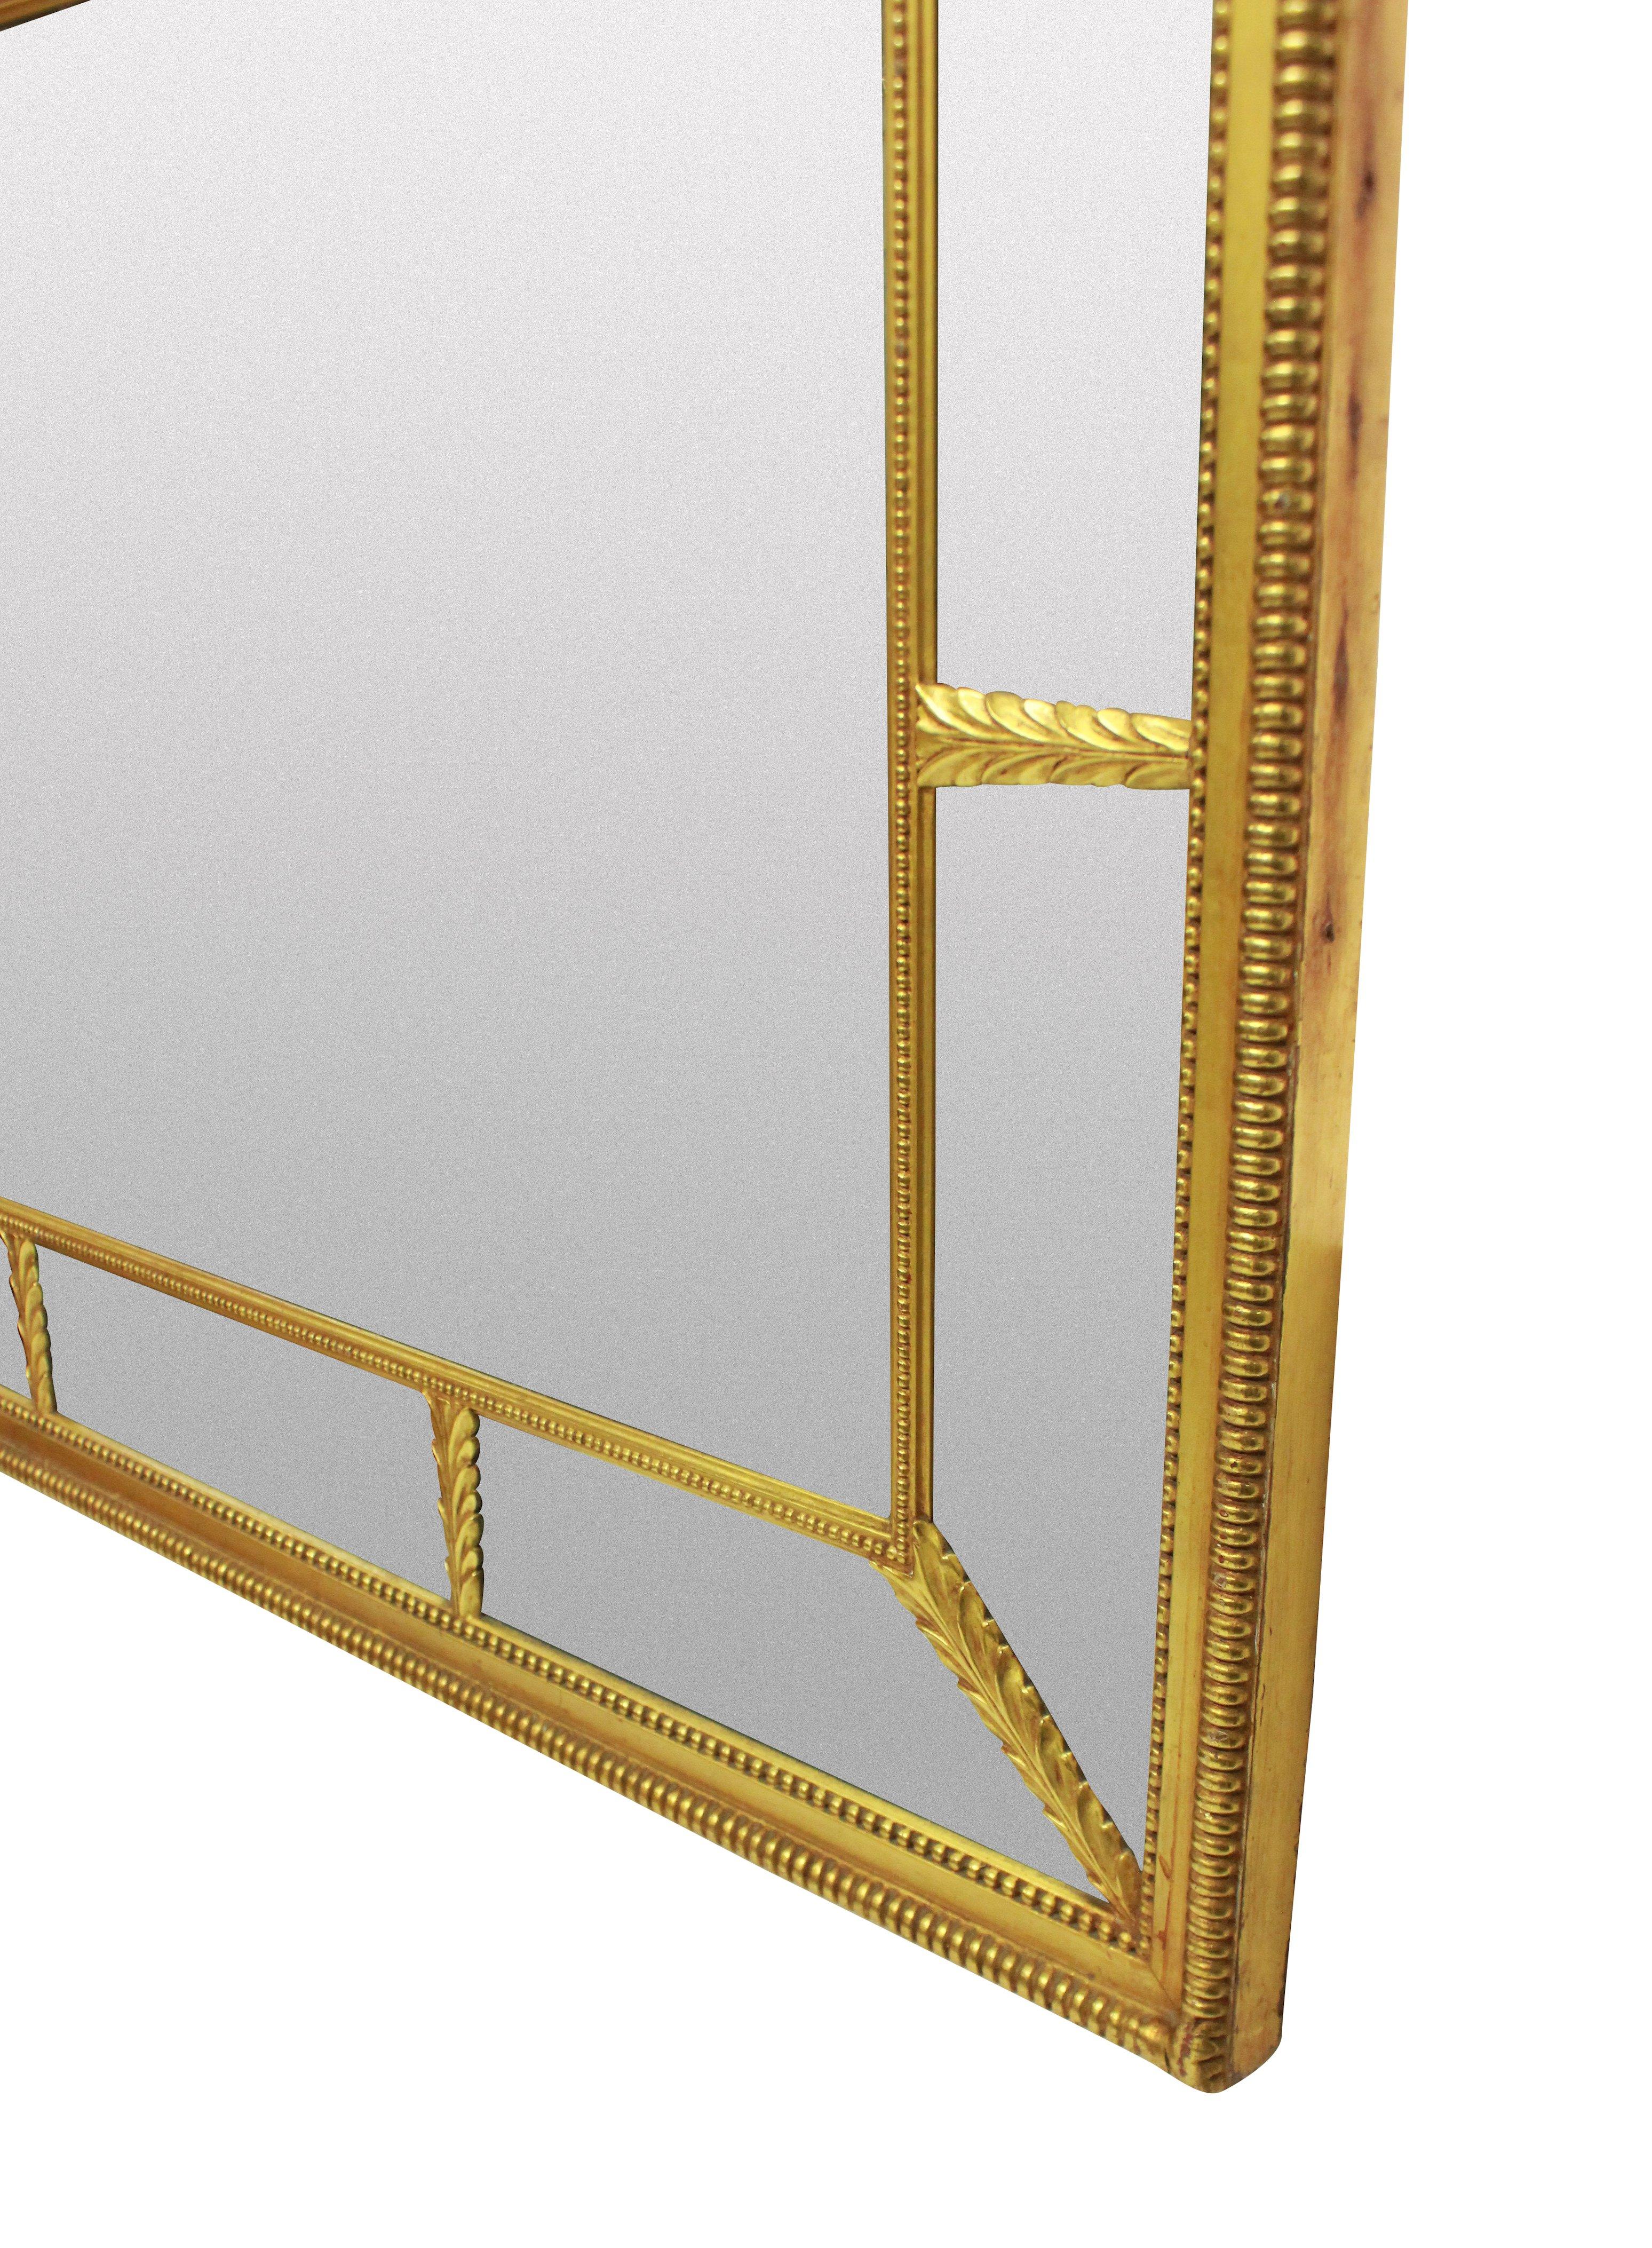 A fine English water gilded Regency style sectional mirror. The mirror could hang portrait or landscape and has its original glass, which has natural foxing and discoloration in places.